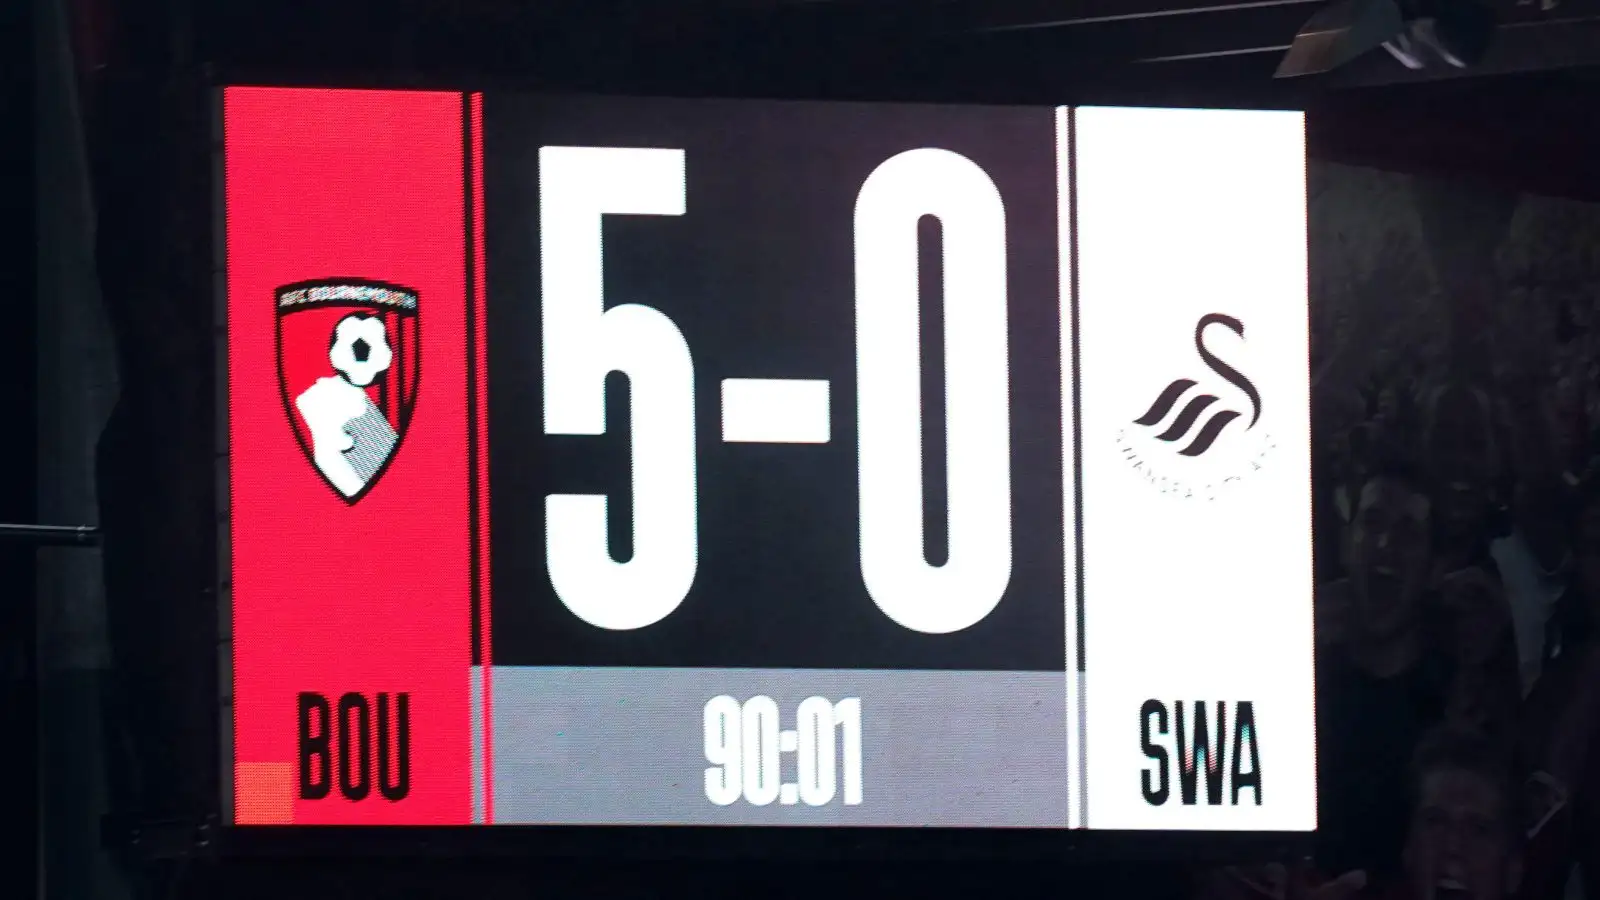 Bournemouth 5-0 Swansea: The last withstanding being confirmed on the immense filter after the last whistle.